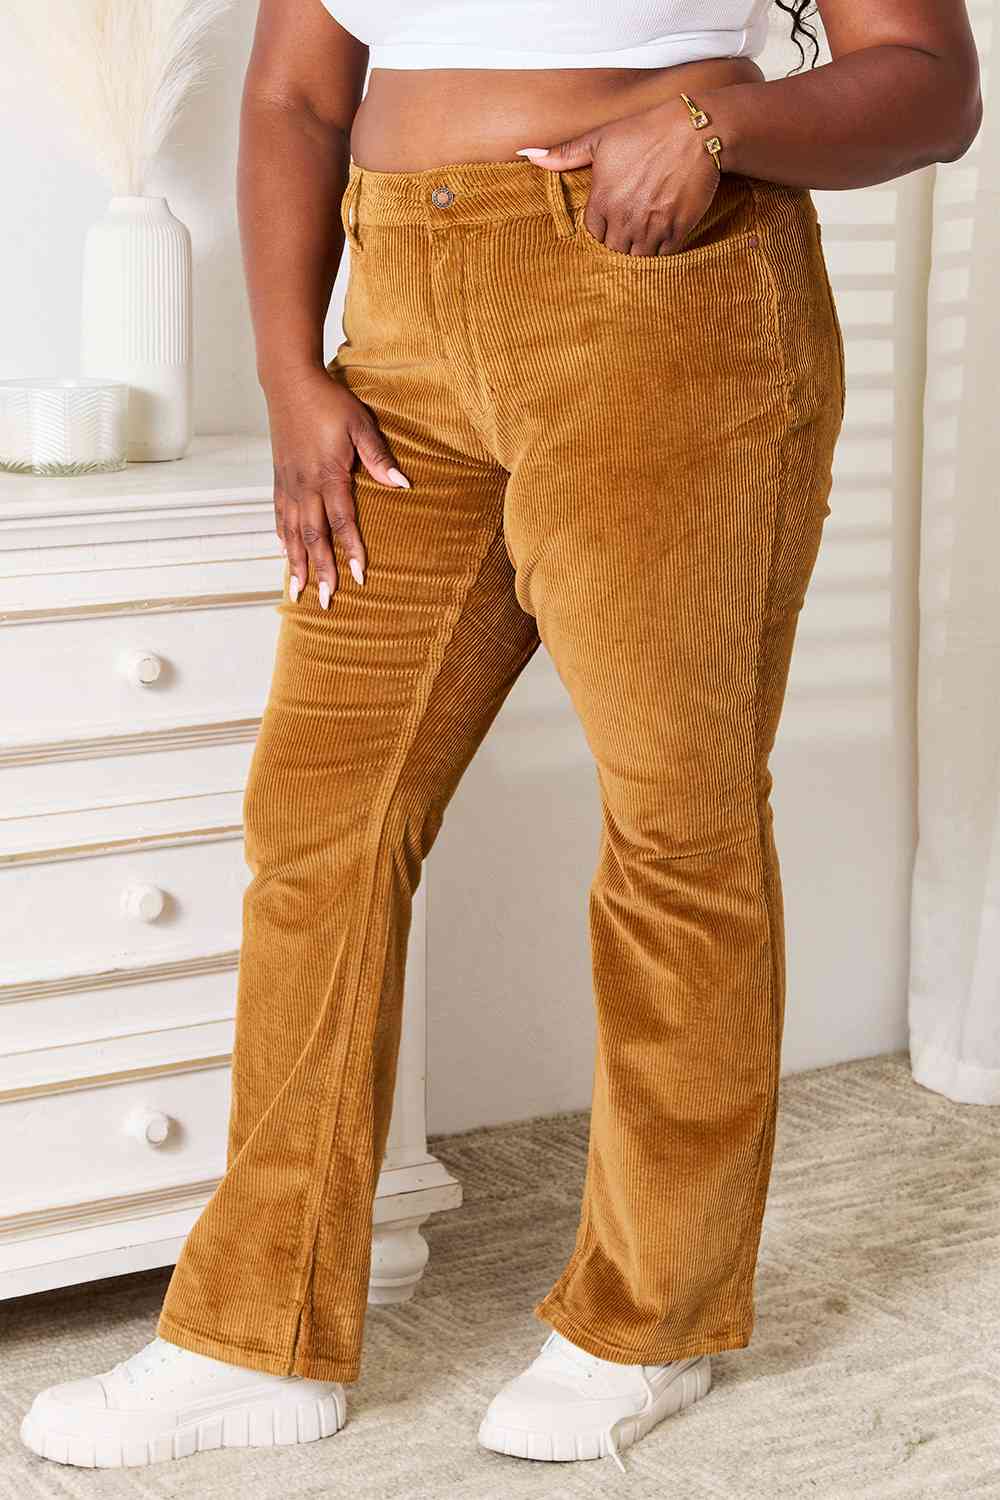 Mid Rise Corduroy Pants in CamelJeansJudy Blue